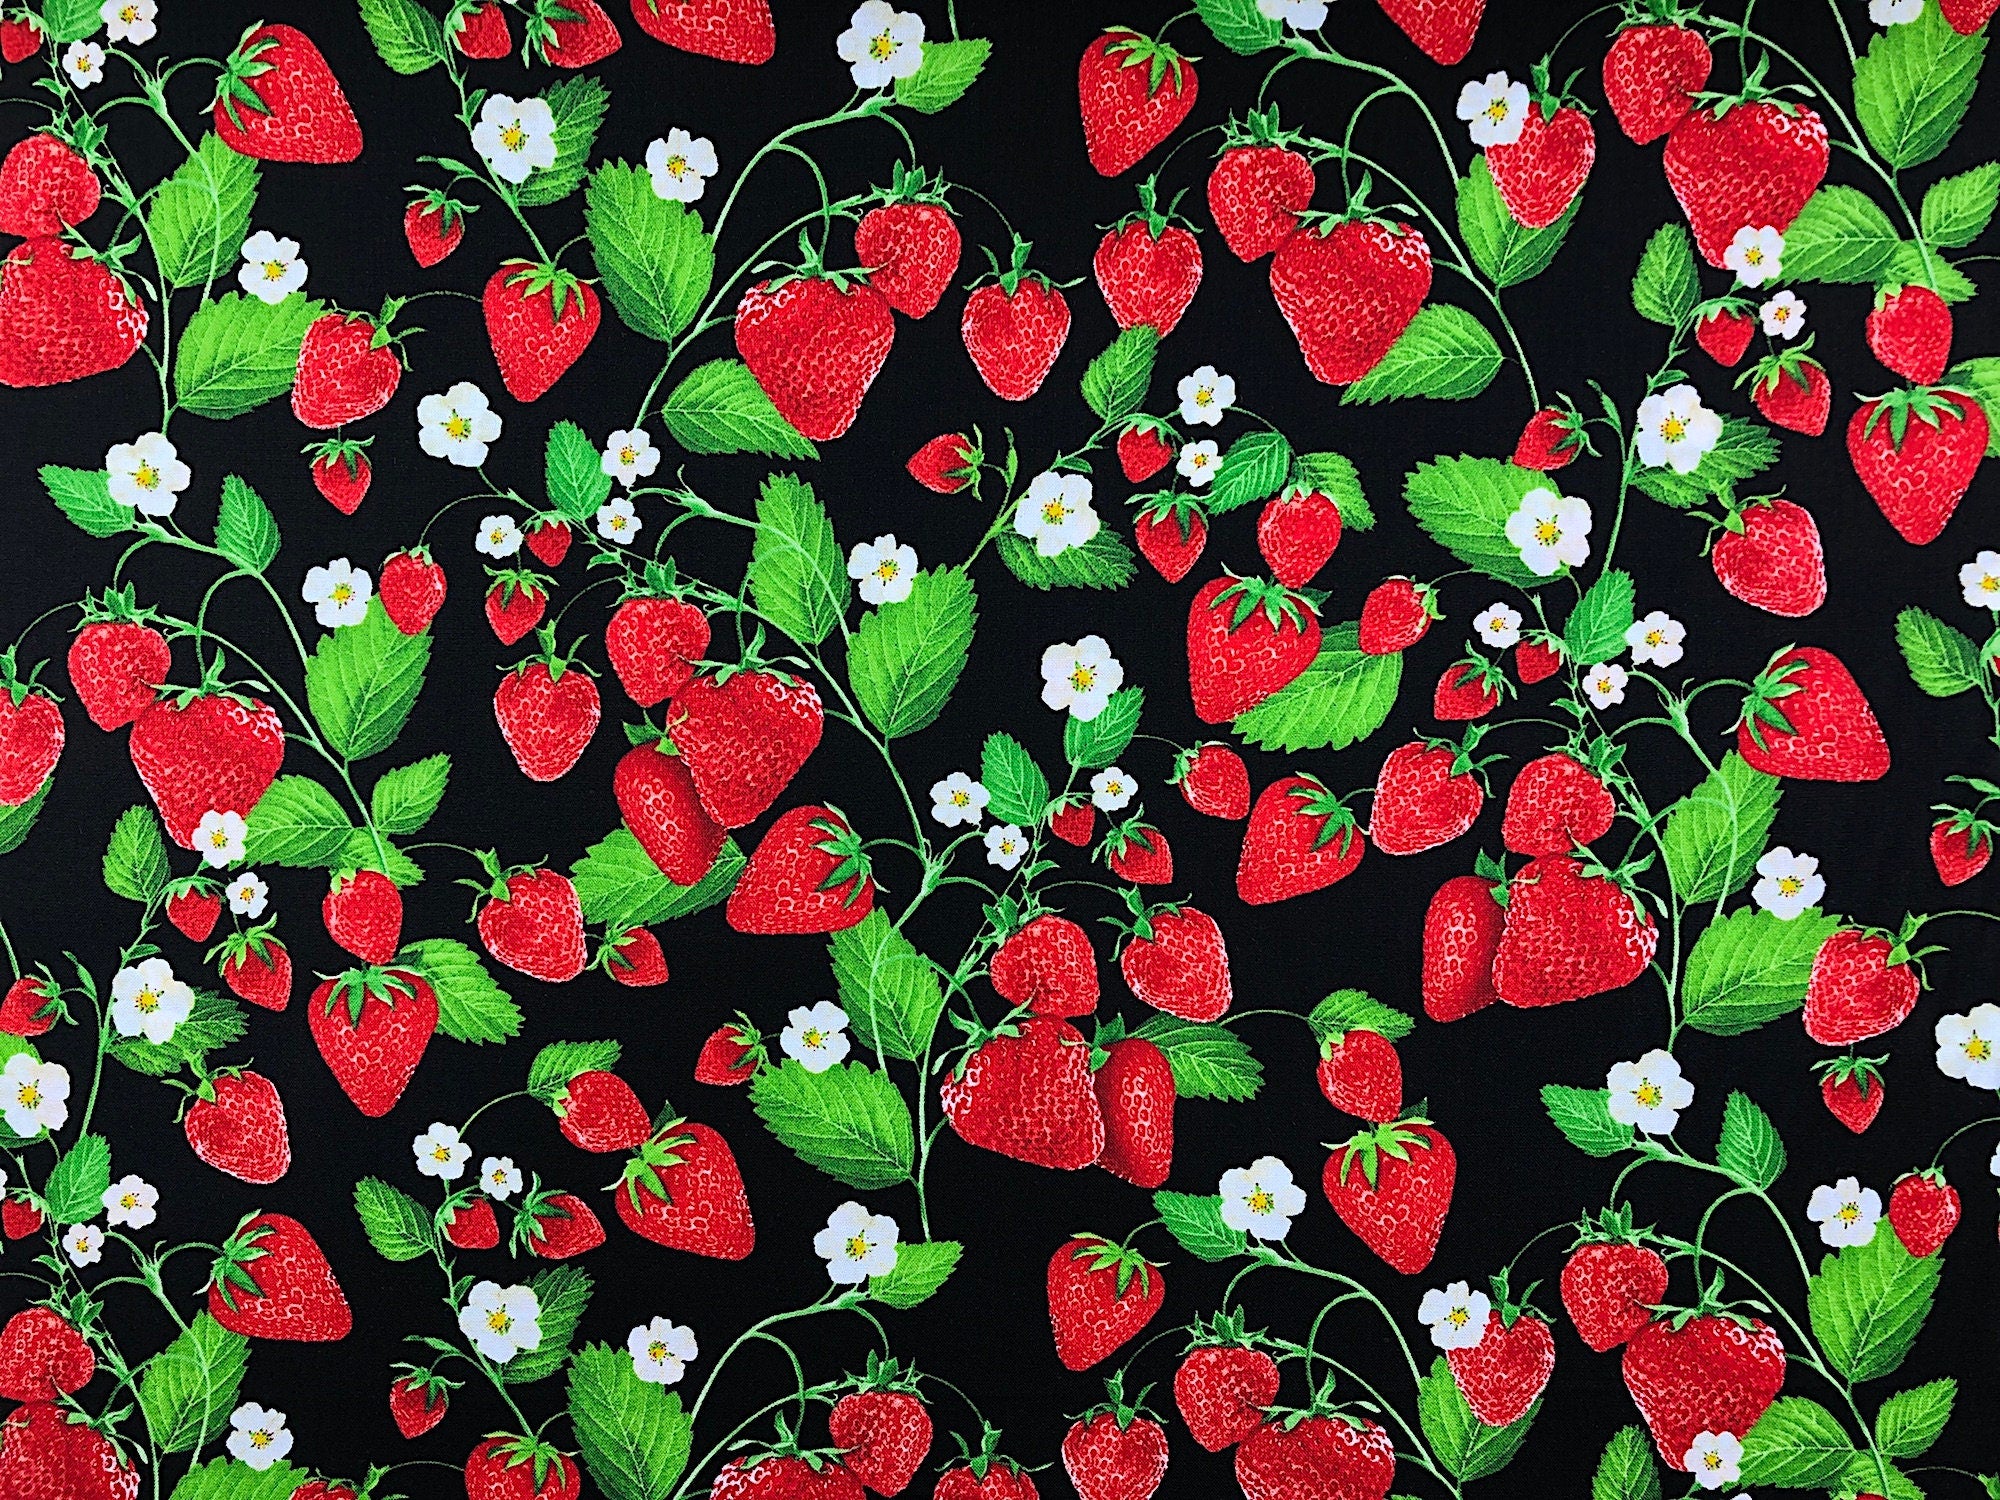 This Black fabric is covered with strawberries and flowers on the vine. The vines are scattered throughout the entire fabric pattern